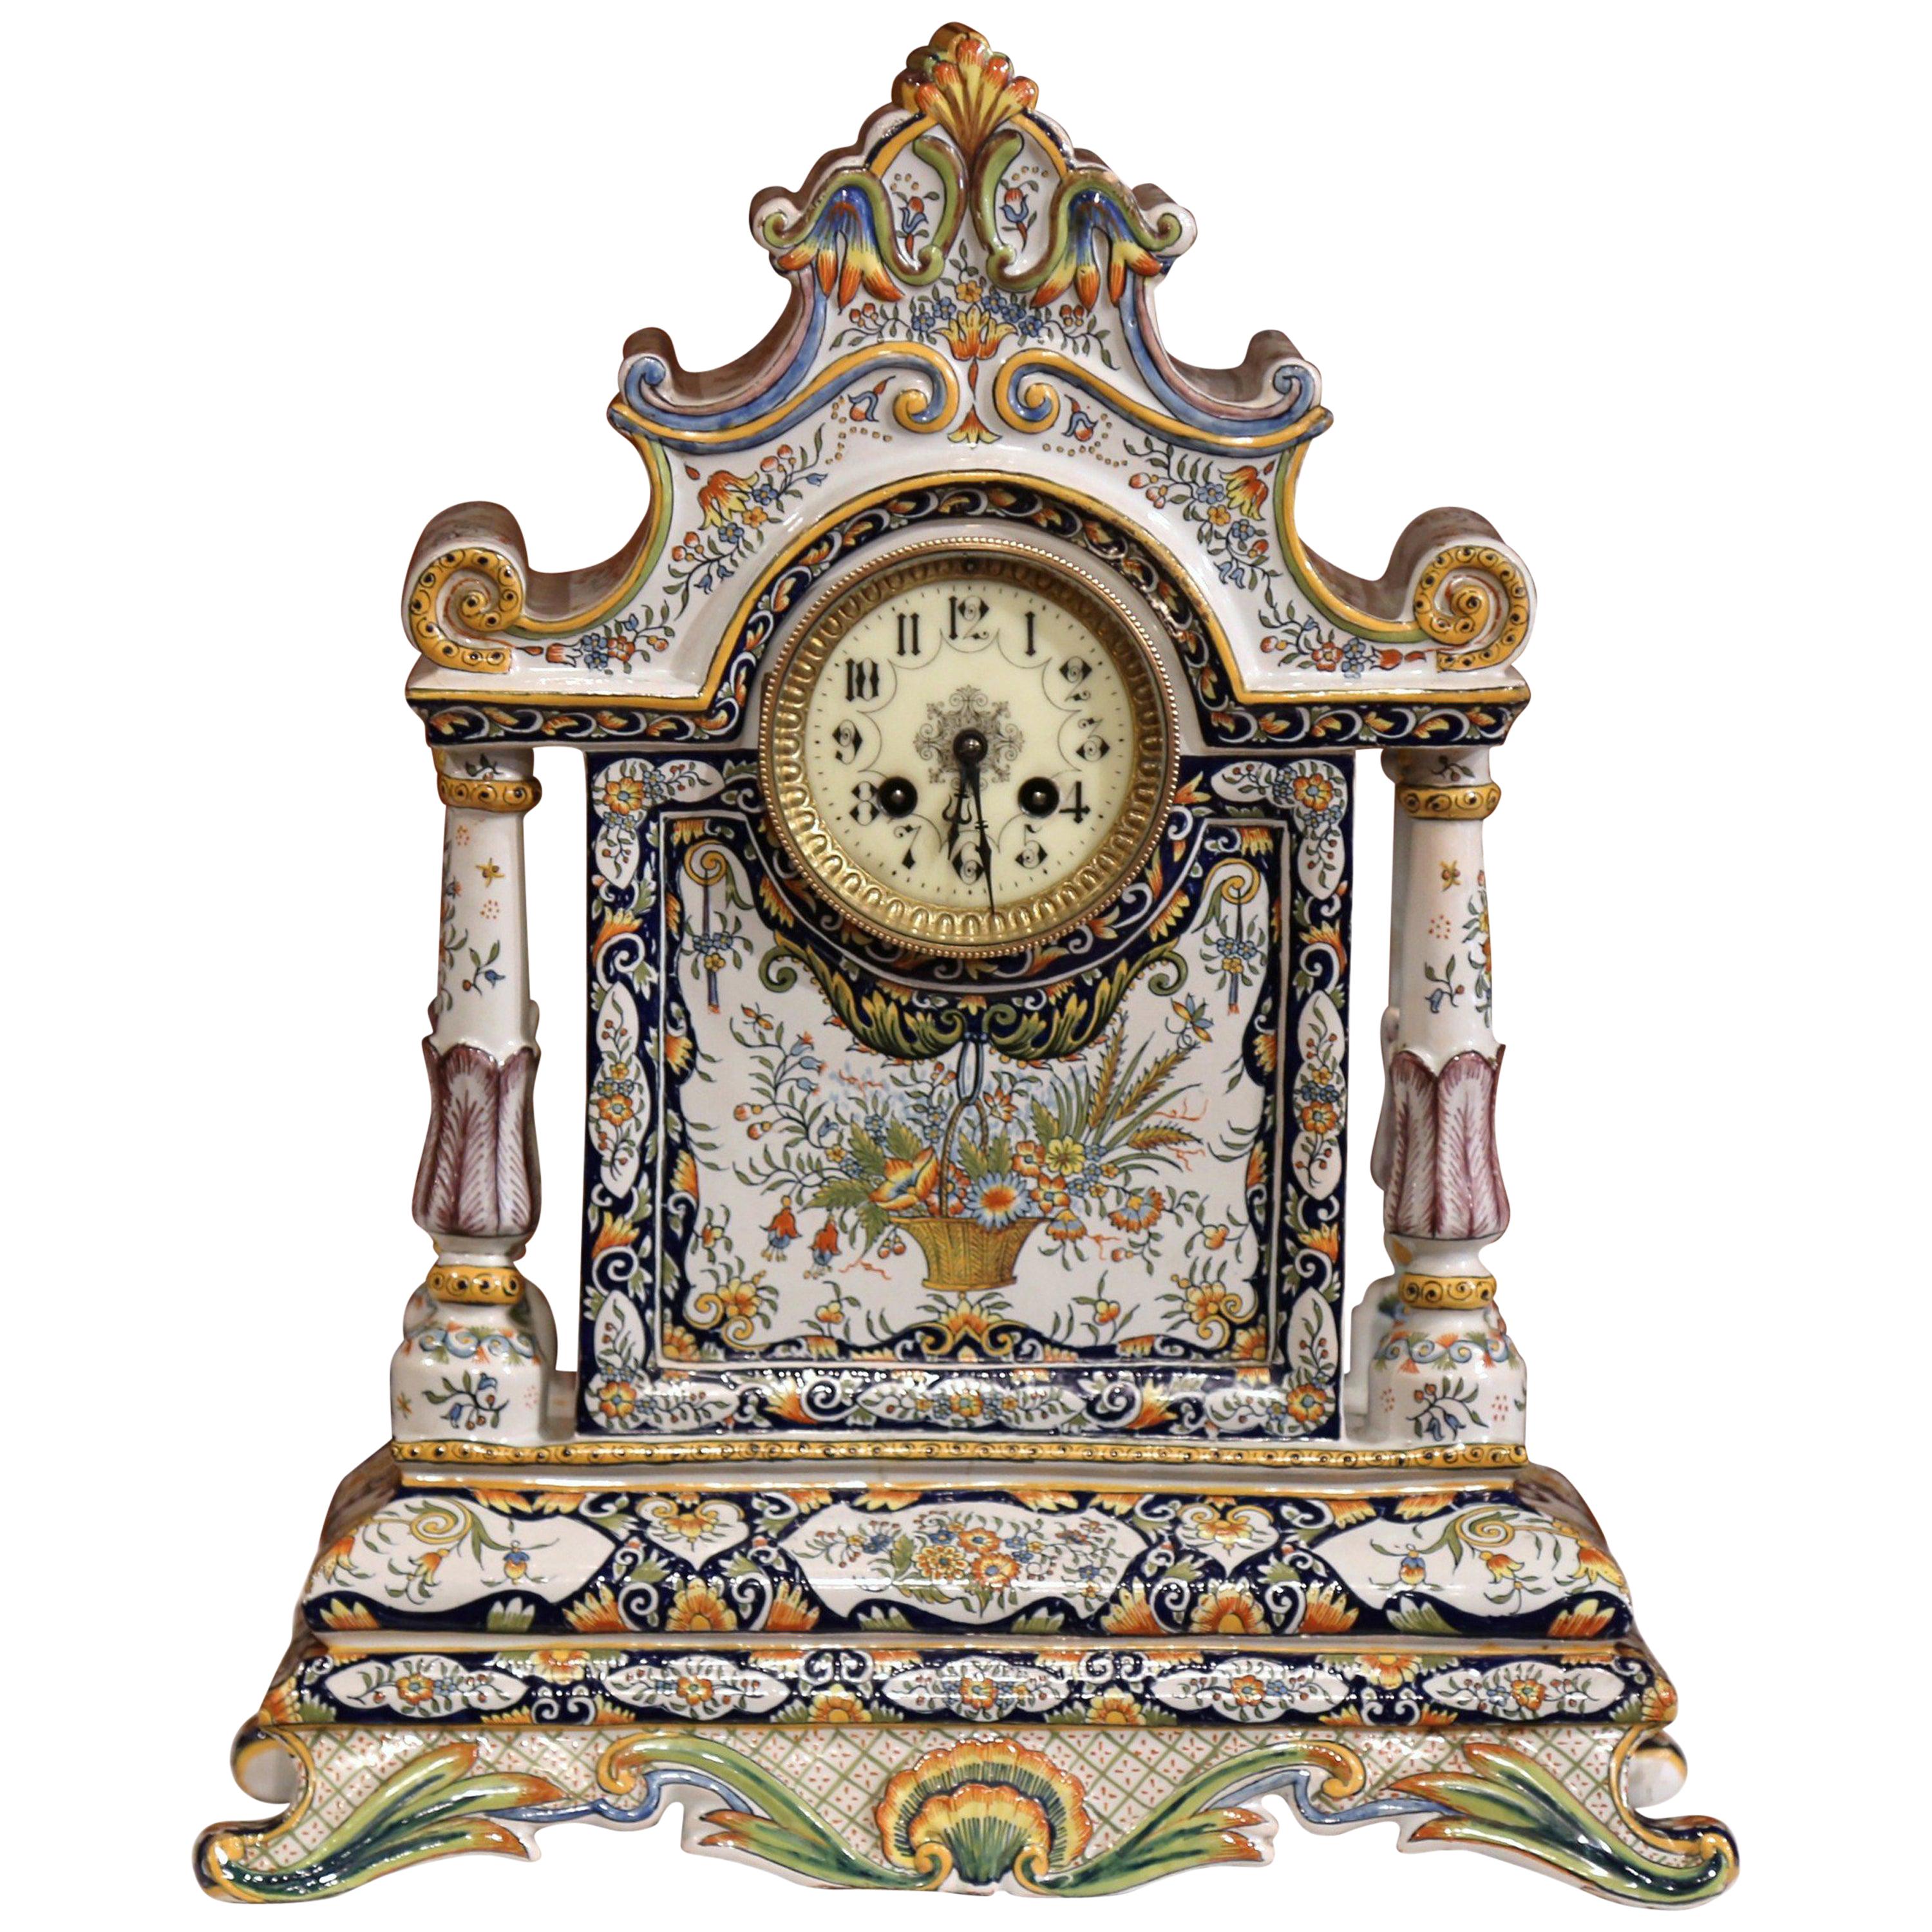 19th Century French Hand Painted Faience Mantel Clock from Rouen